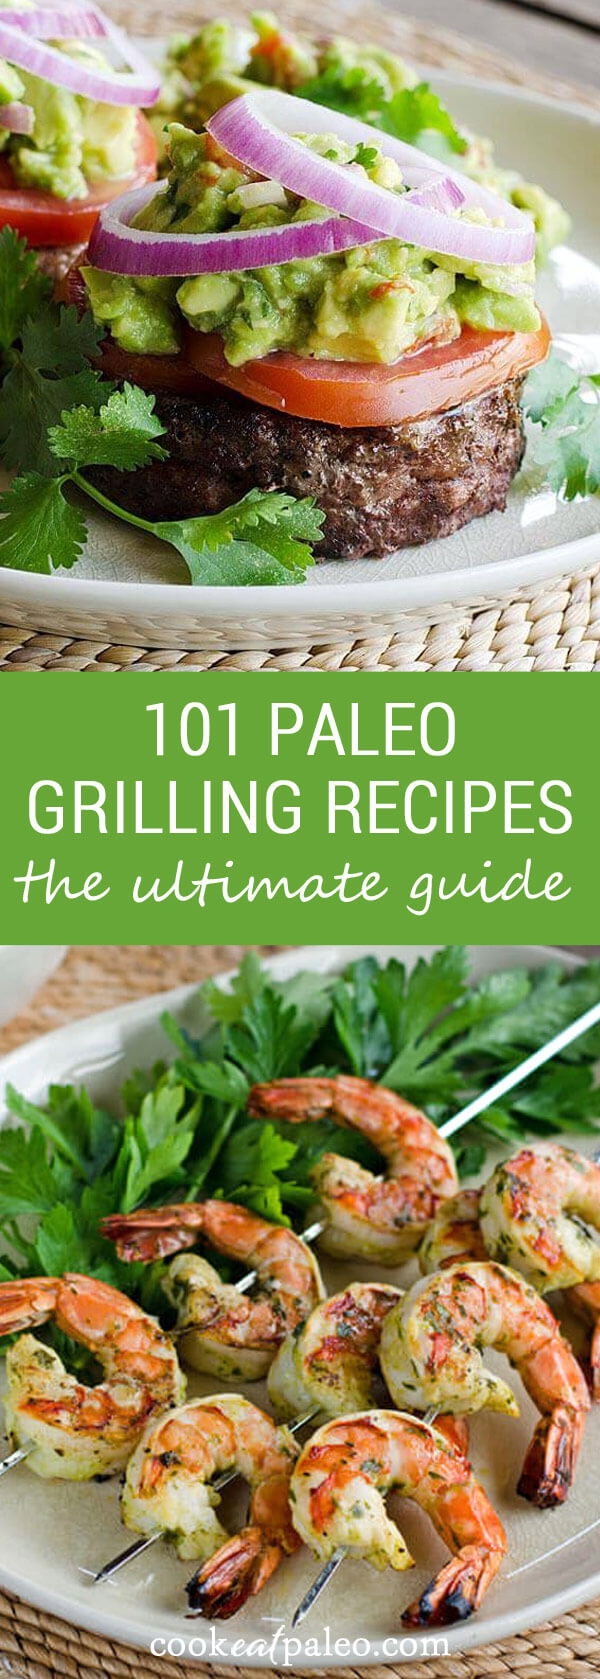 Grill Ideas For Summer
 101 Paleo Grilling Recipes for Easy Summer Meals